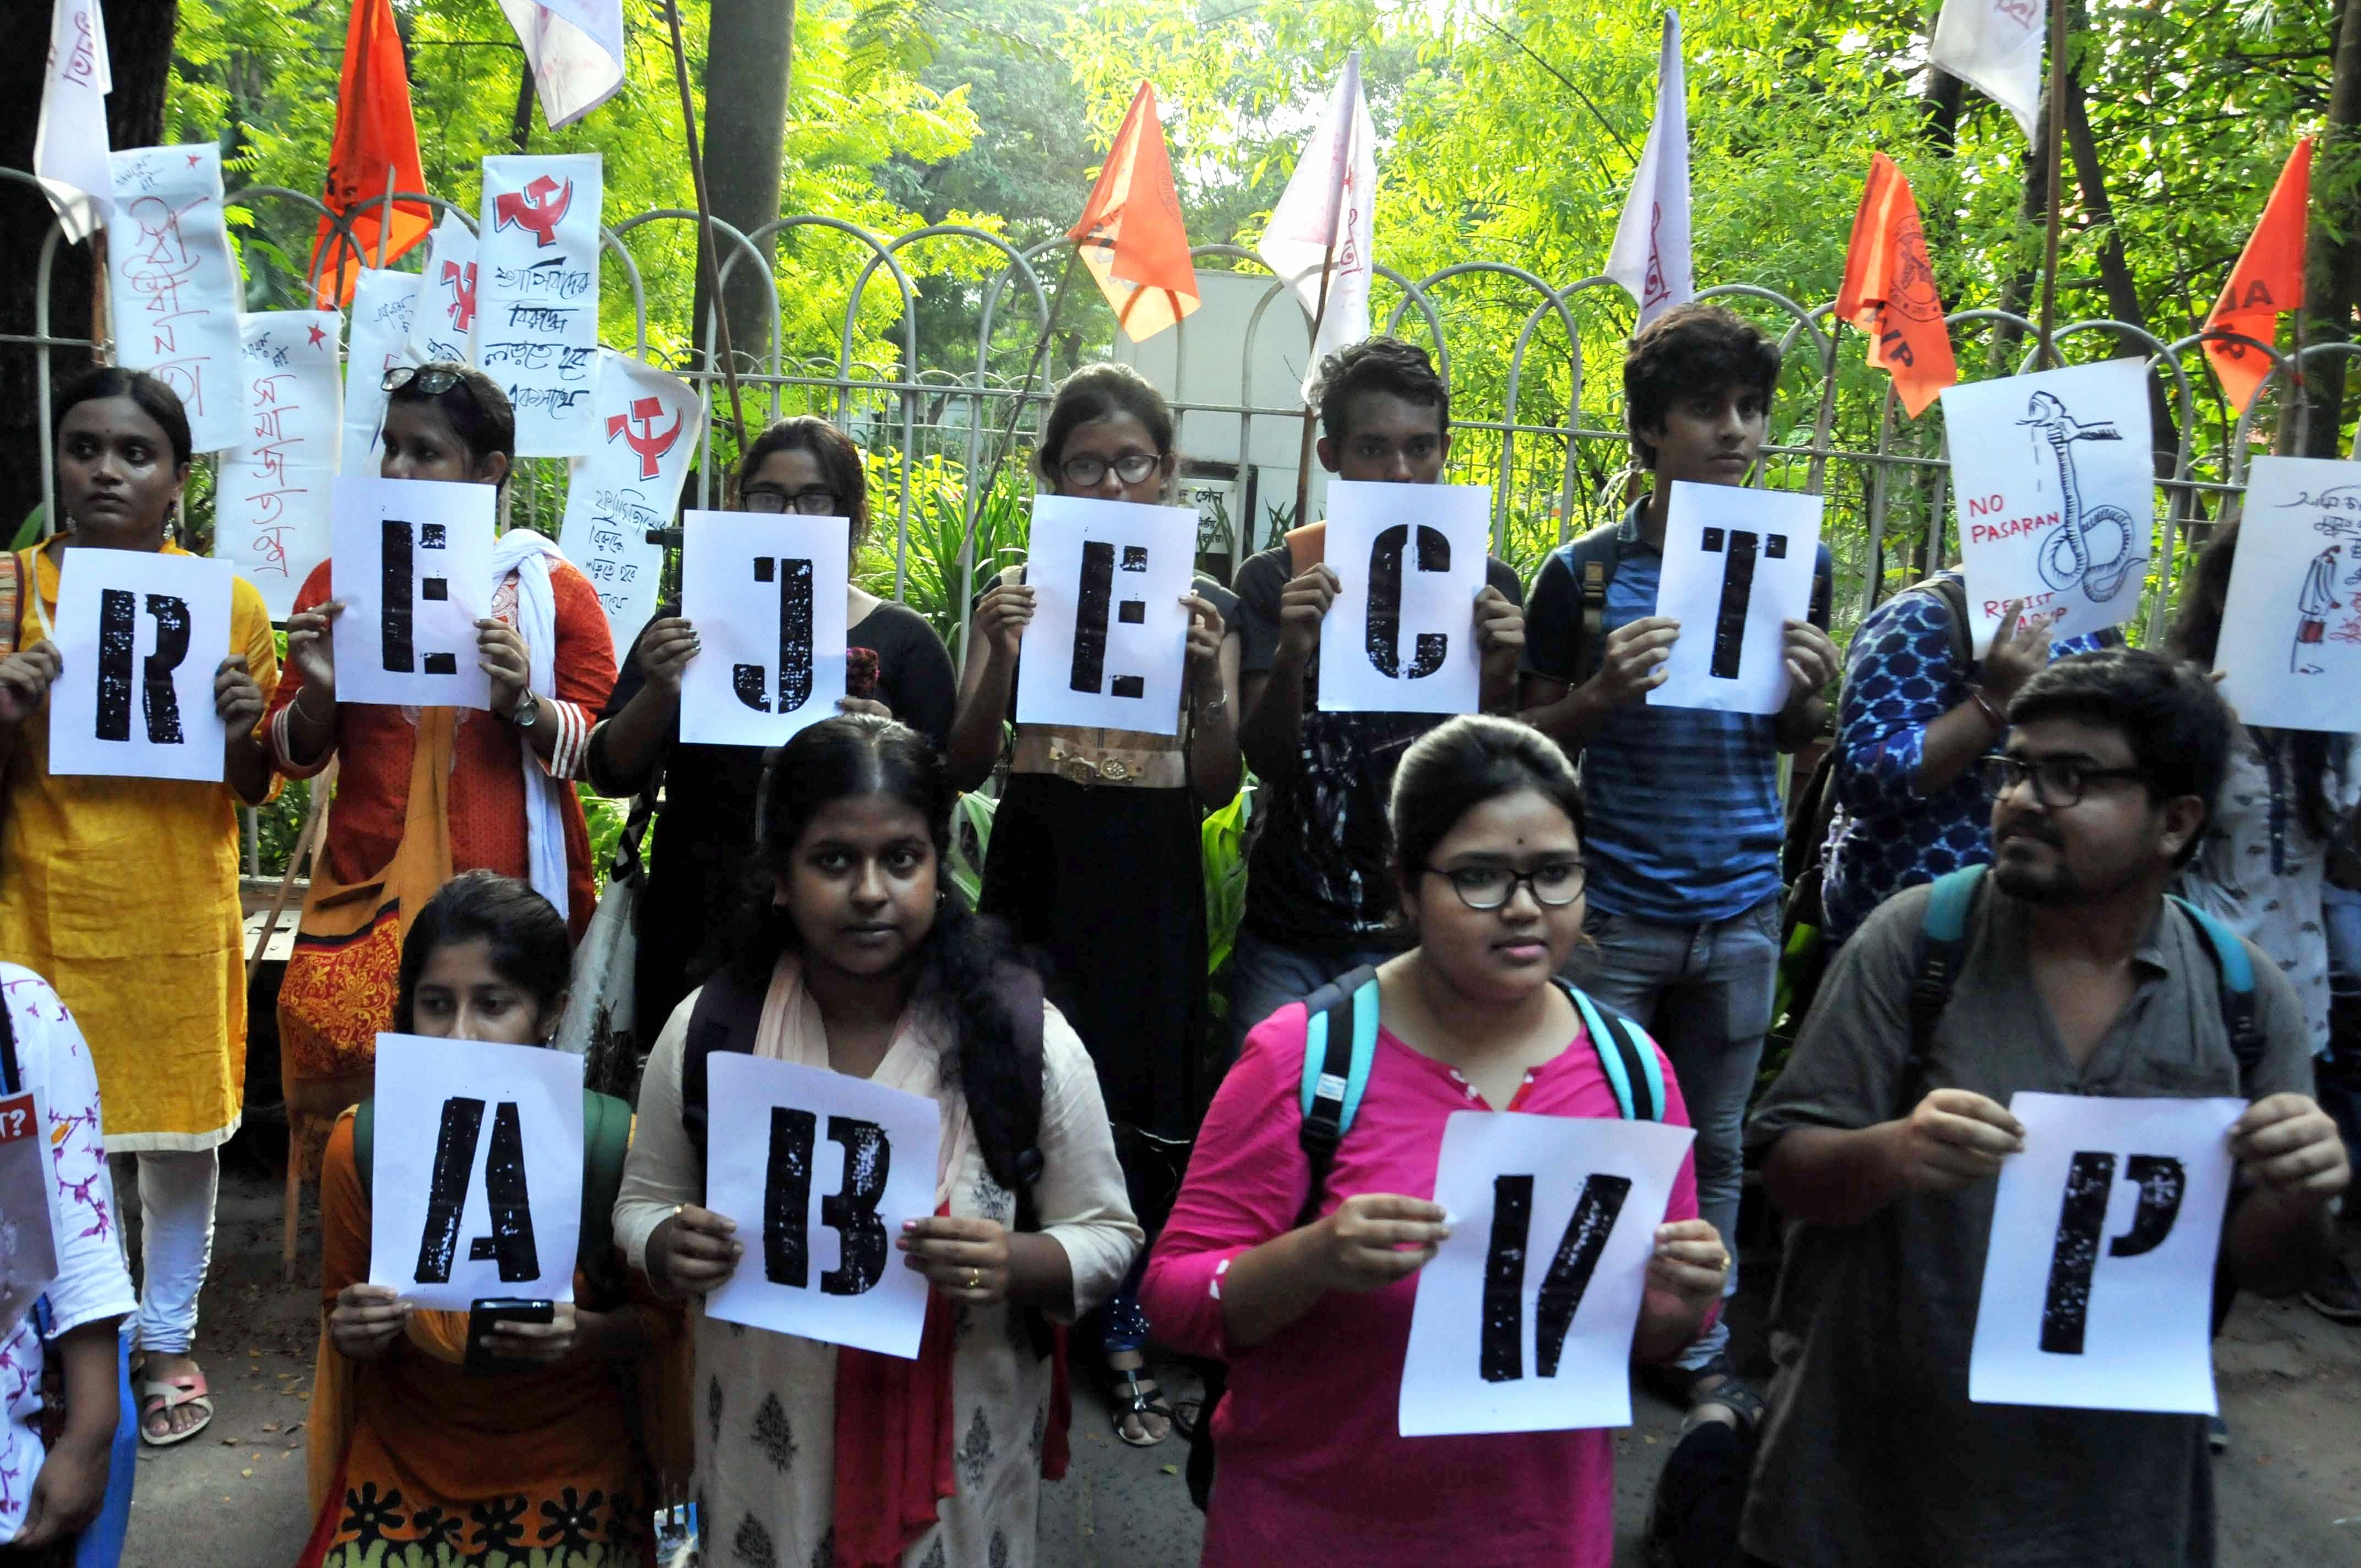 Students of Jadavpur University, Calcutta, at a protest against Union minister Babul Supriyos participation in an ABVP seminar on Thursday, September 19, 2019 